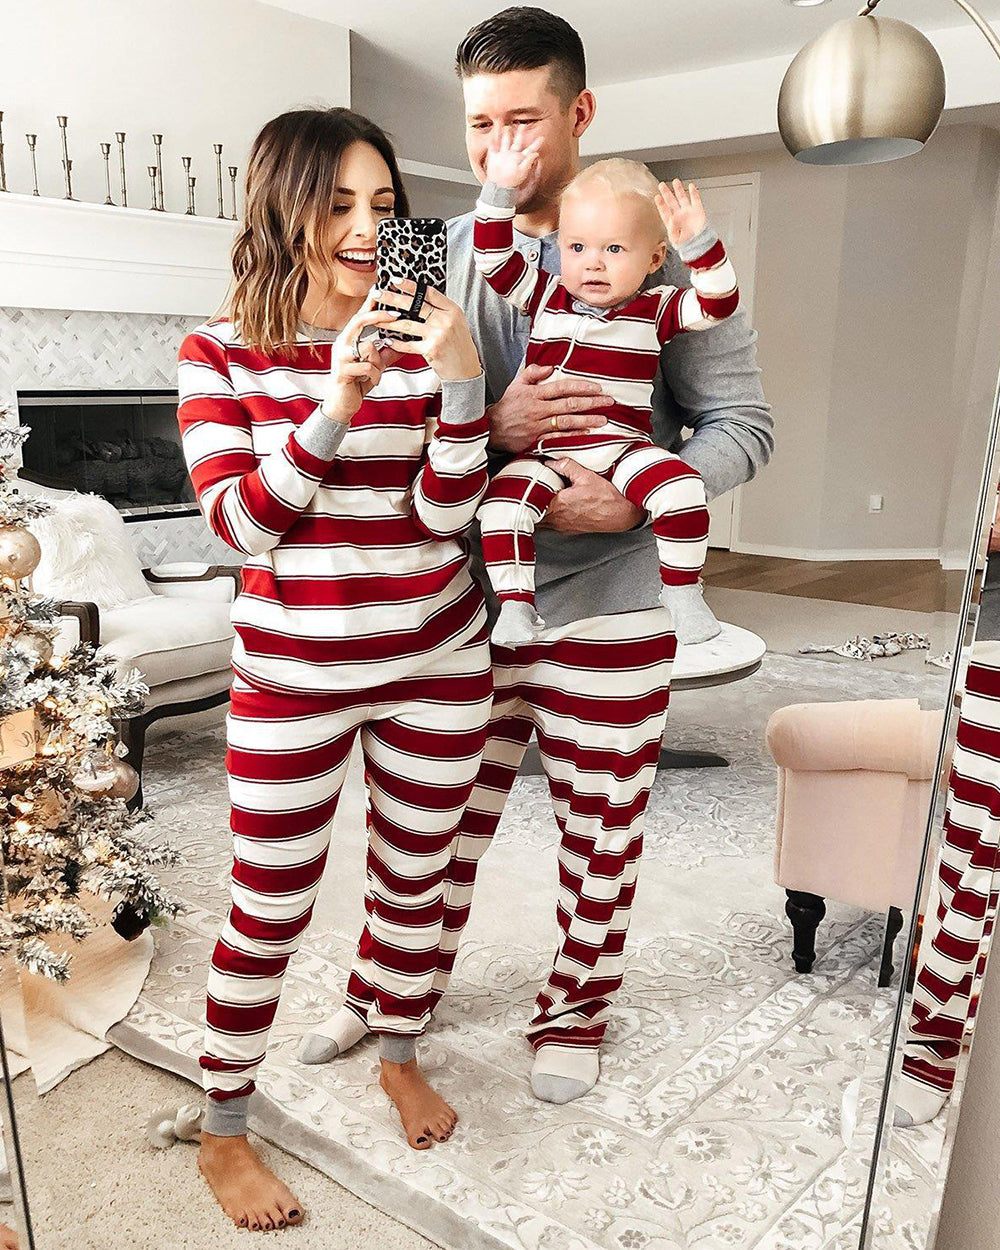 🎁🎅 Get Festive with our Early Christmas Pre-Sale: 50% Off Christmas Red Striped Family Pajamas! 🎄🎁